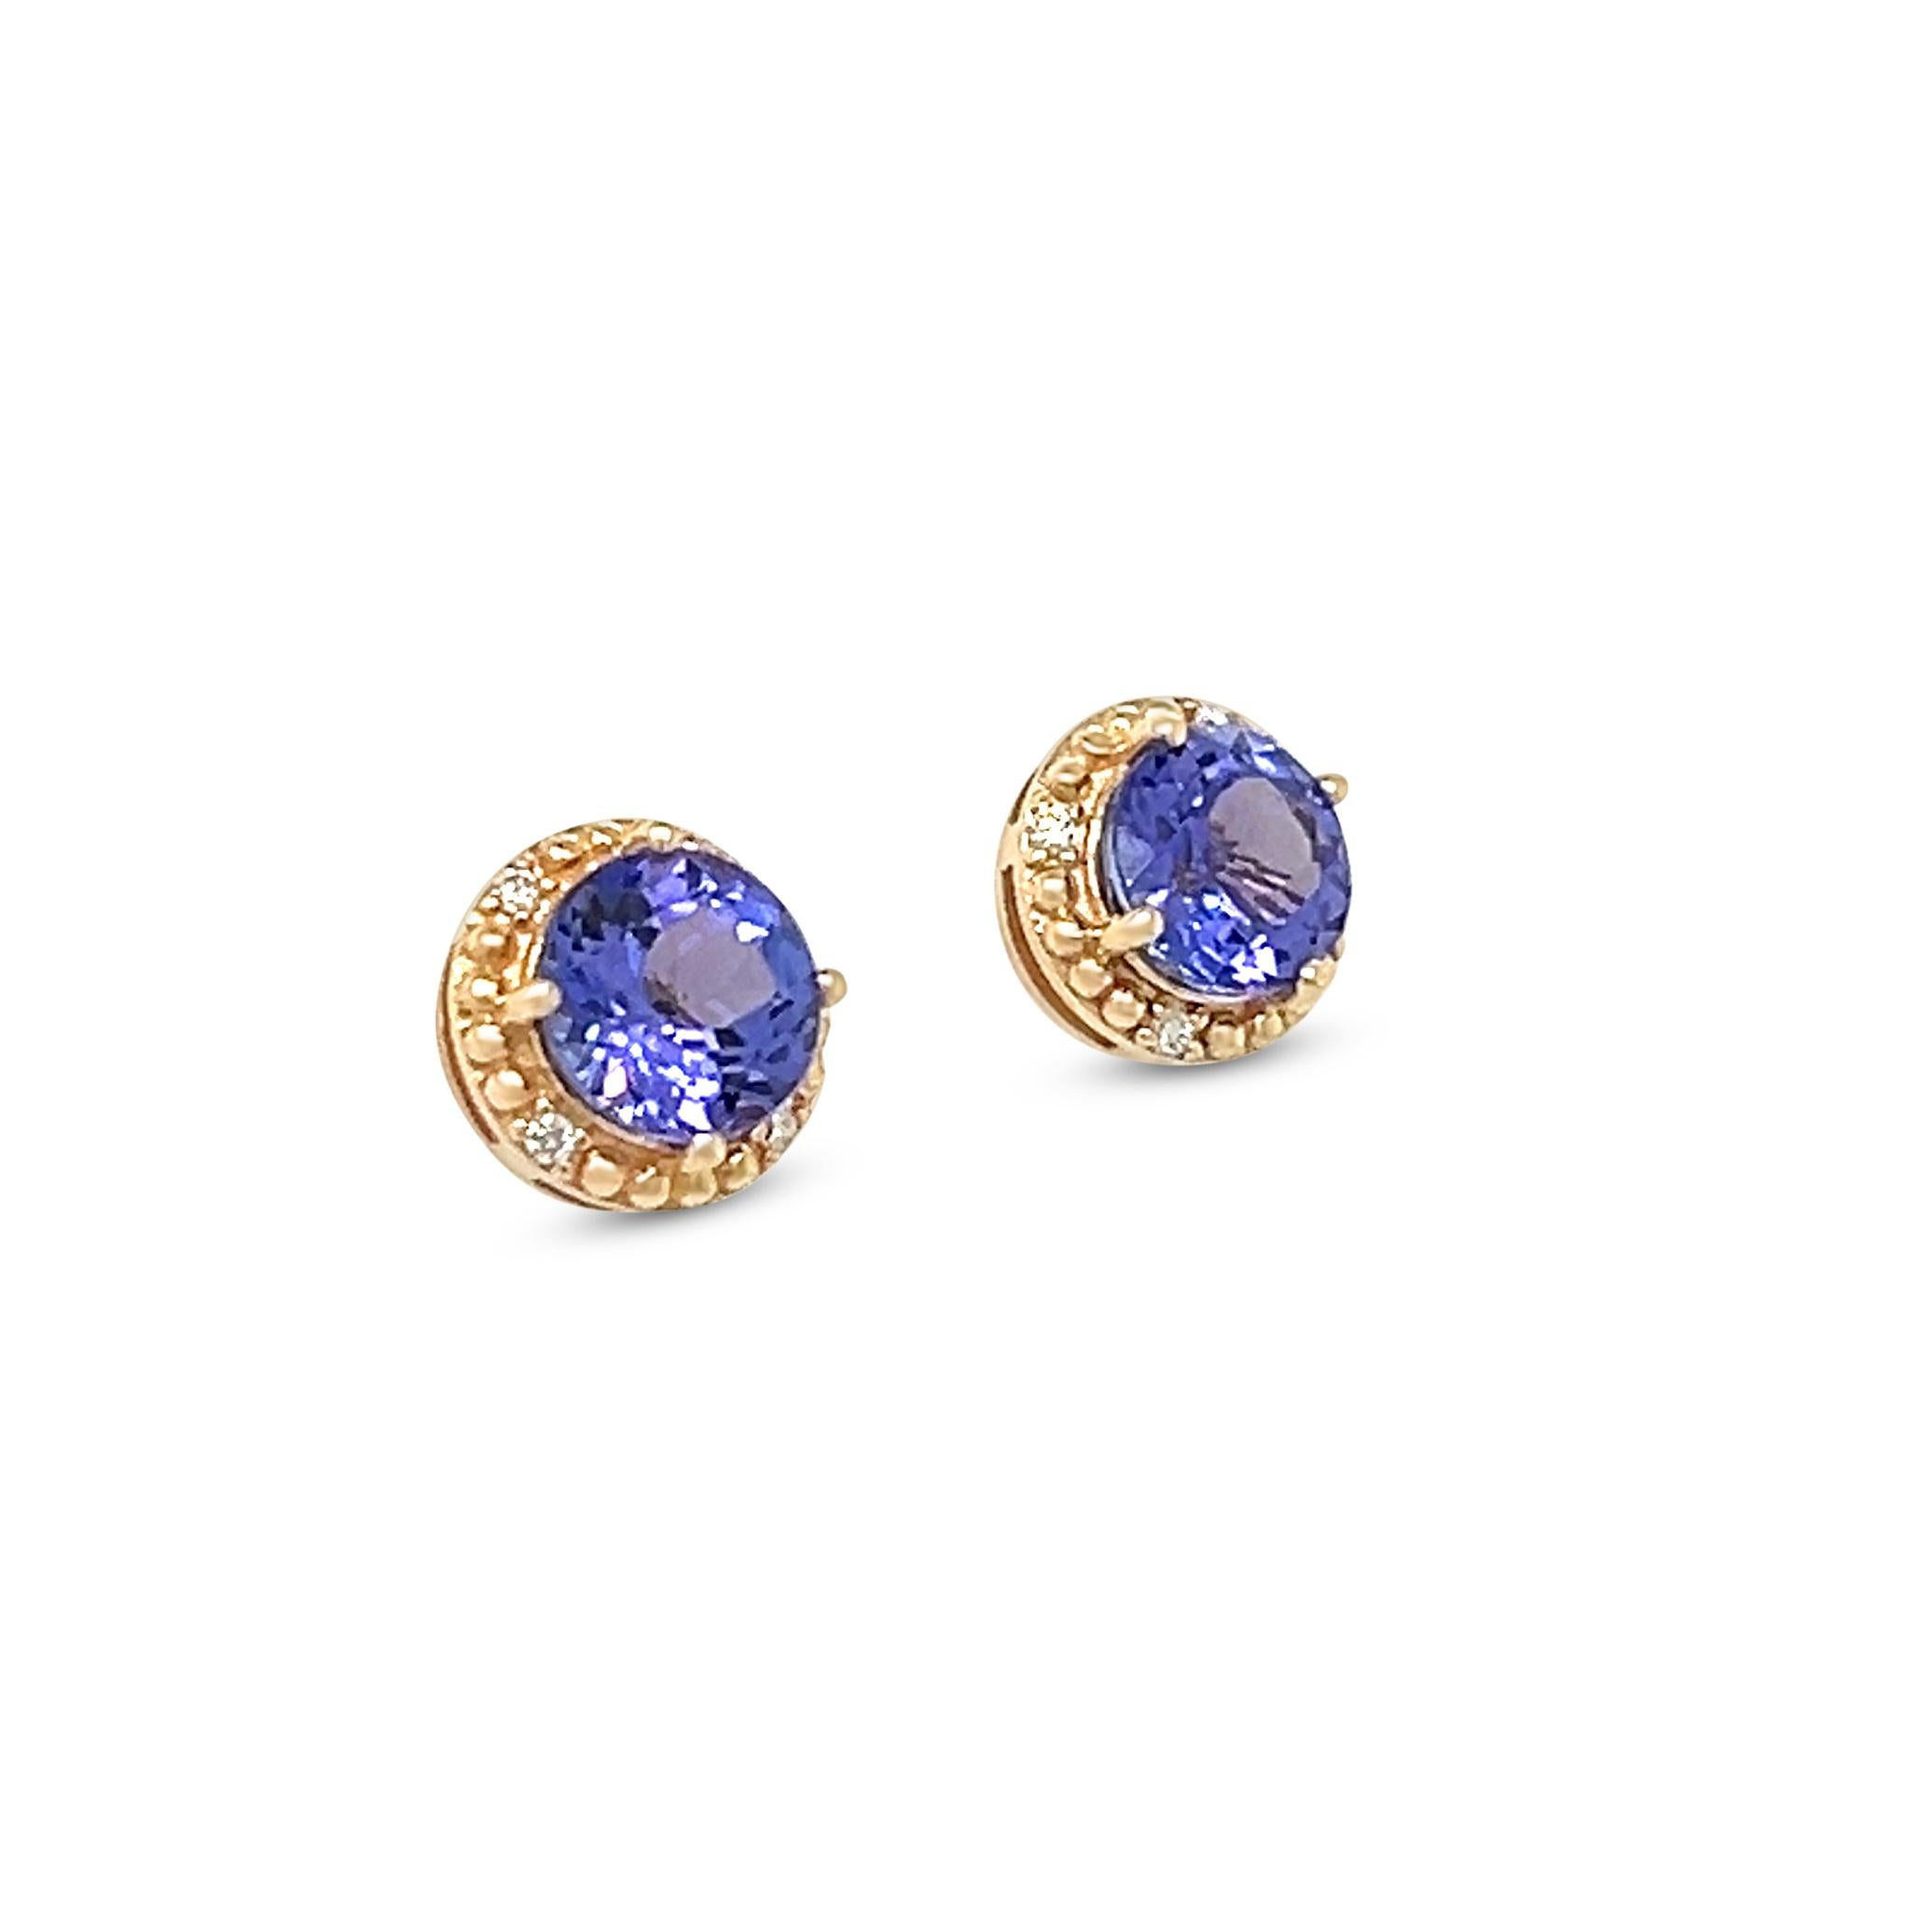 Welcome to Blue Star Gems NY LLC! Discover popular engagement Studs Earrings & wedding Earrings designs from classic to vintage inspired. We offer Joyful jewelry for everyday wear. Just for you. We go above and beyond the current industry standards